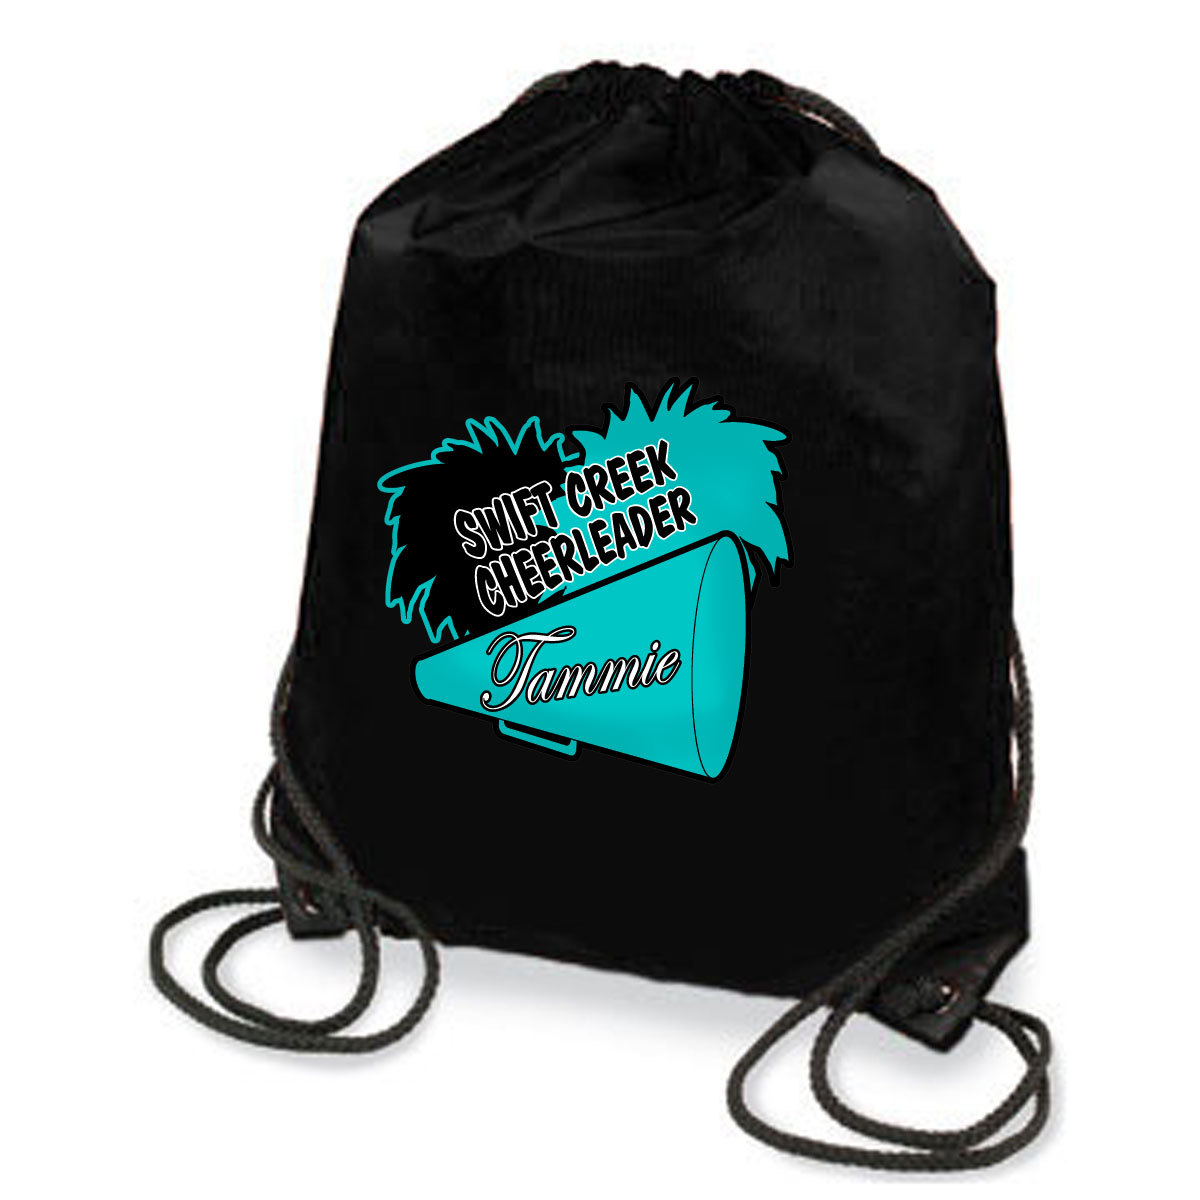 Personalized Swift Creek Cheer sport tote with teal megaphone